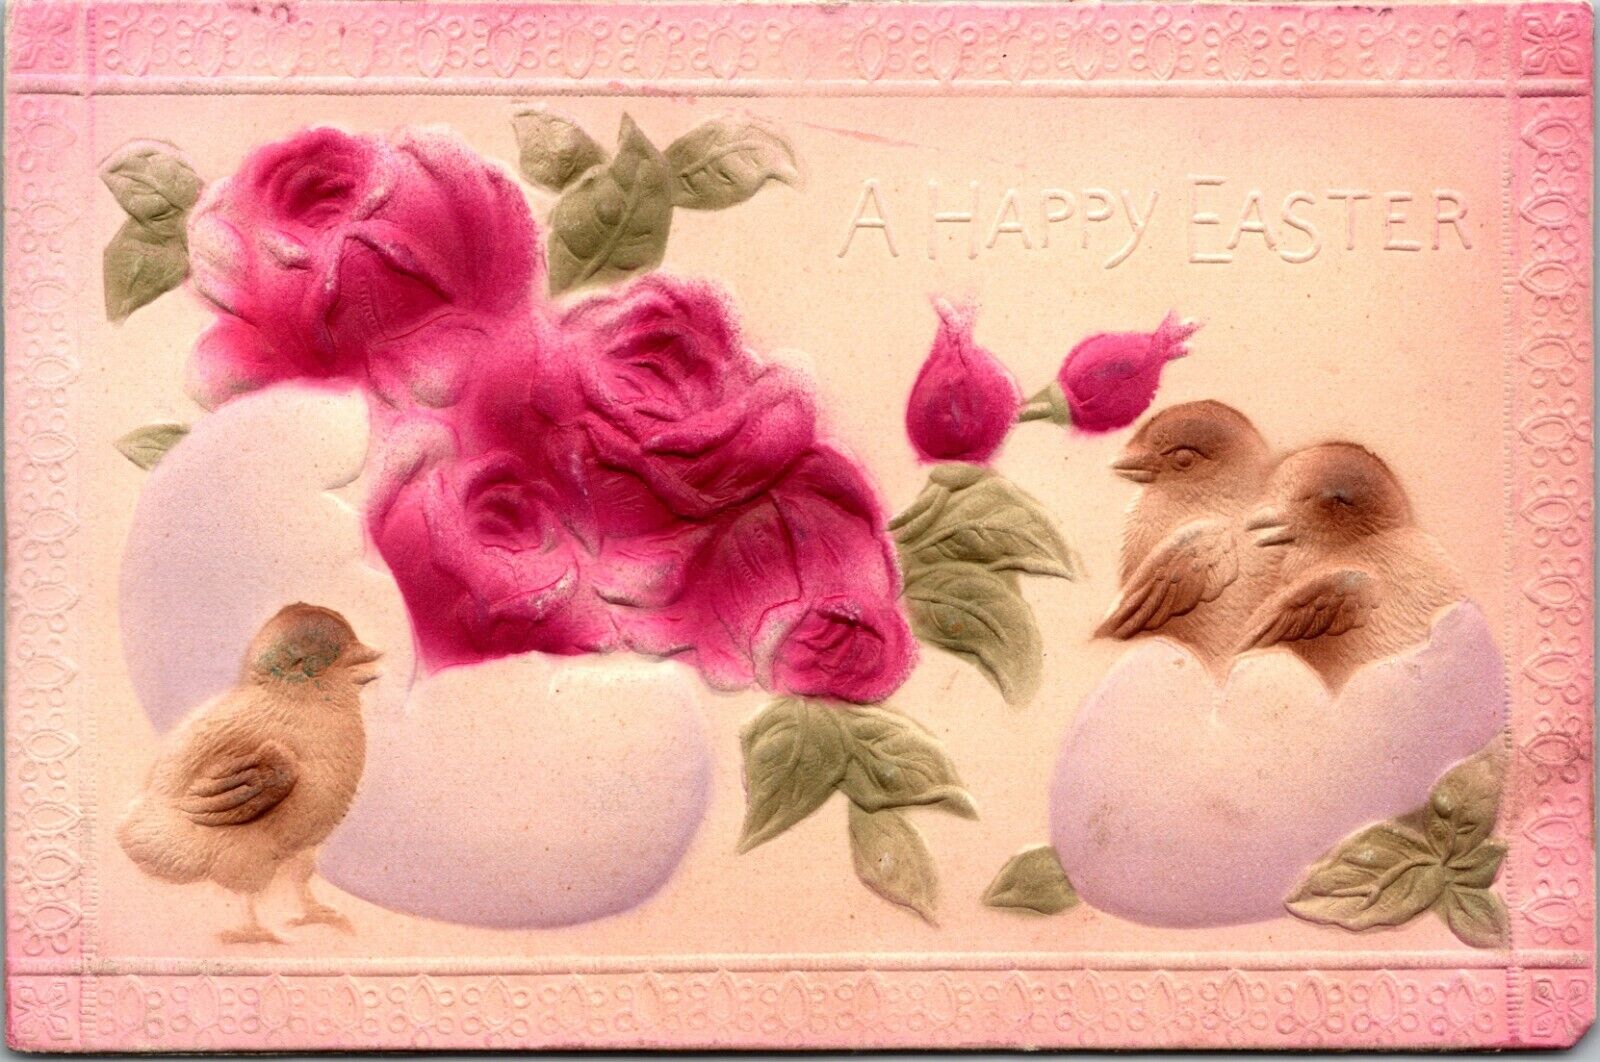 Easter Postcard Chicks Eggs Hot Pink Roses Flowers Hand Airbrushed Heavy Emboss